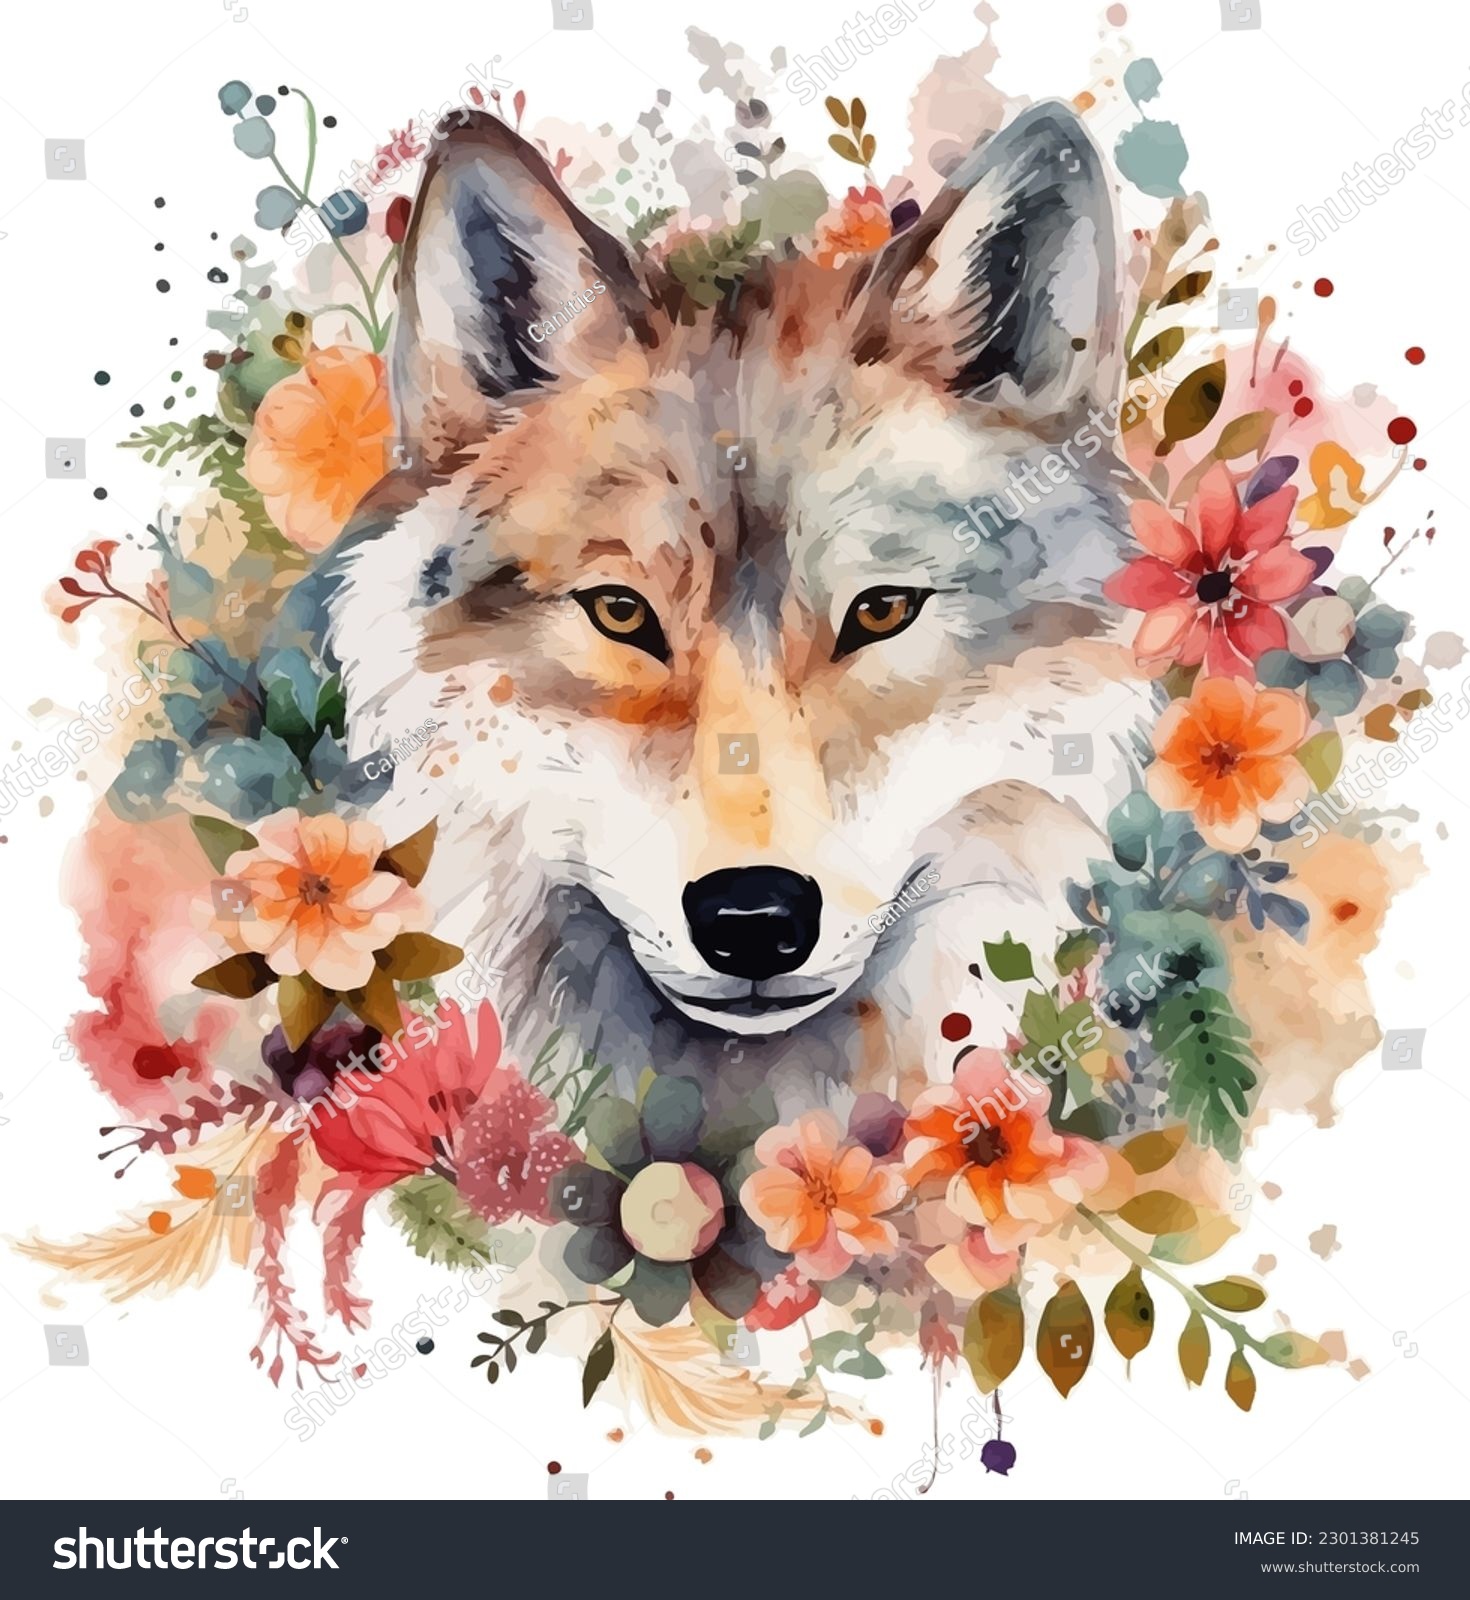 SVG of Watercolor painting of a wolf with flowers wreath. Isolated on white background. svg